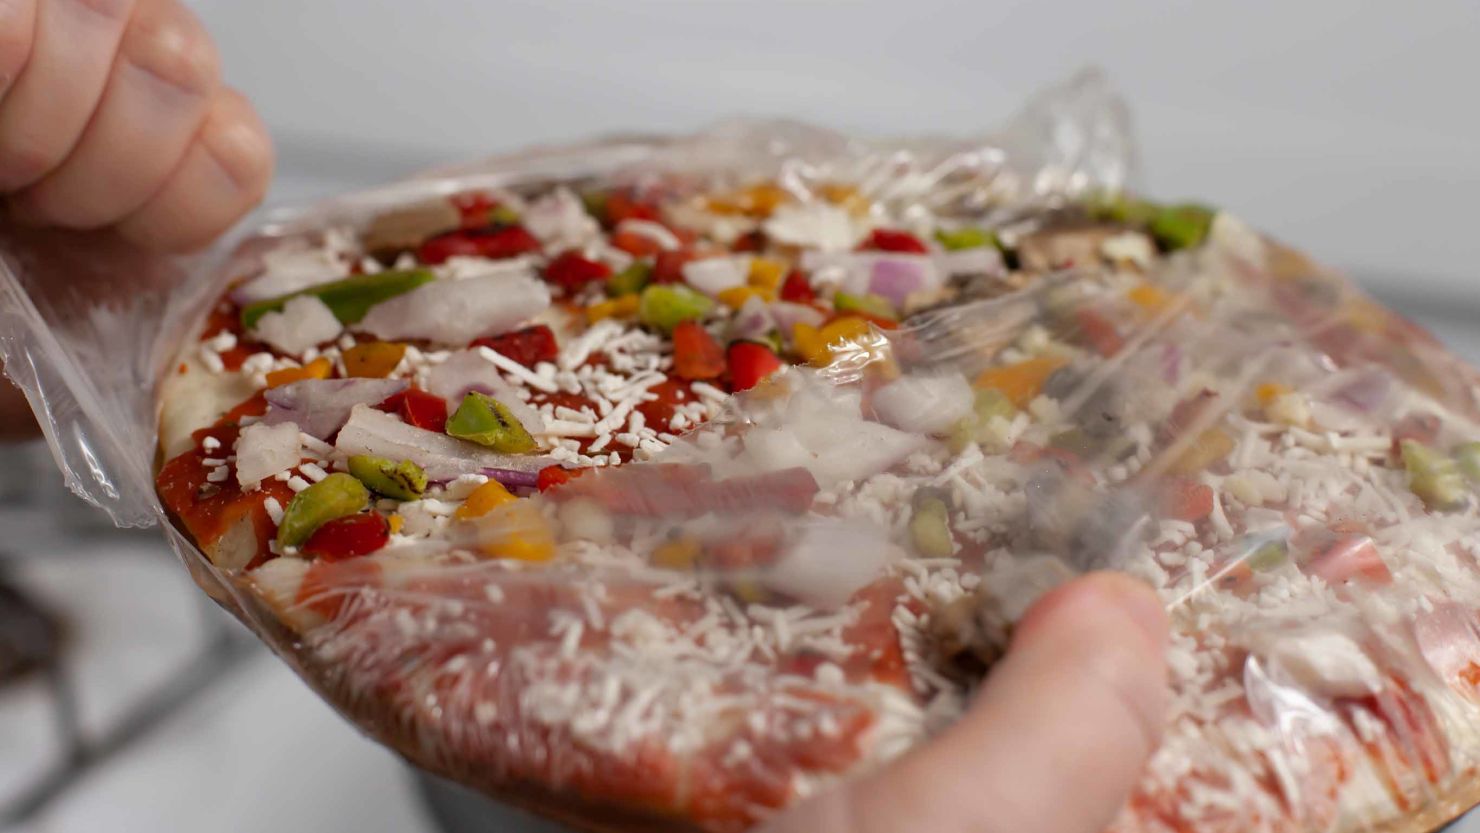 Ultraprocessed foods include  frozen pizza, microwave meals, packaged snacks and desserts